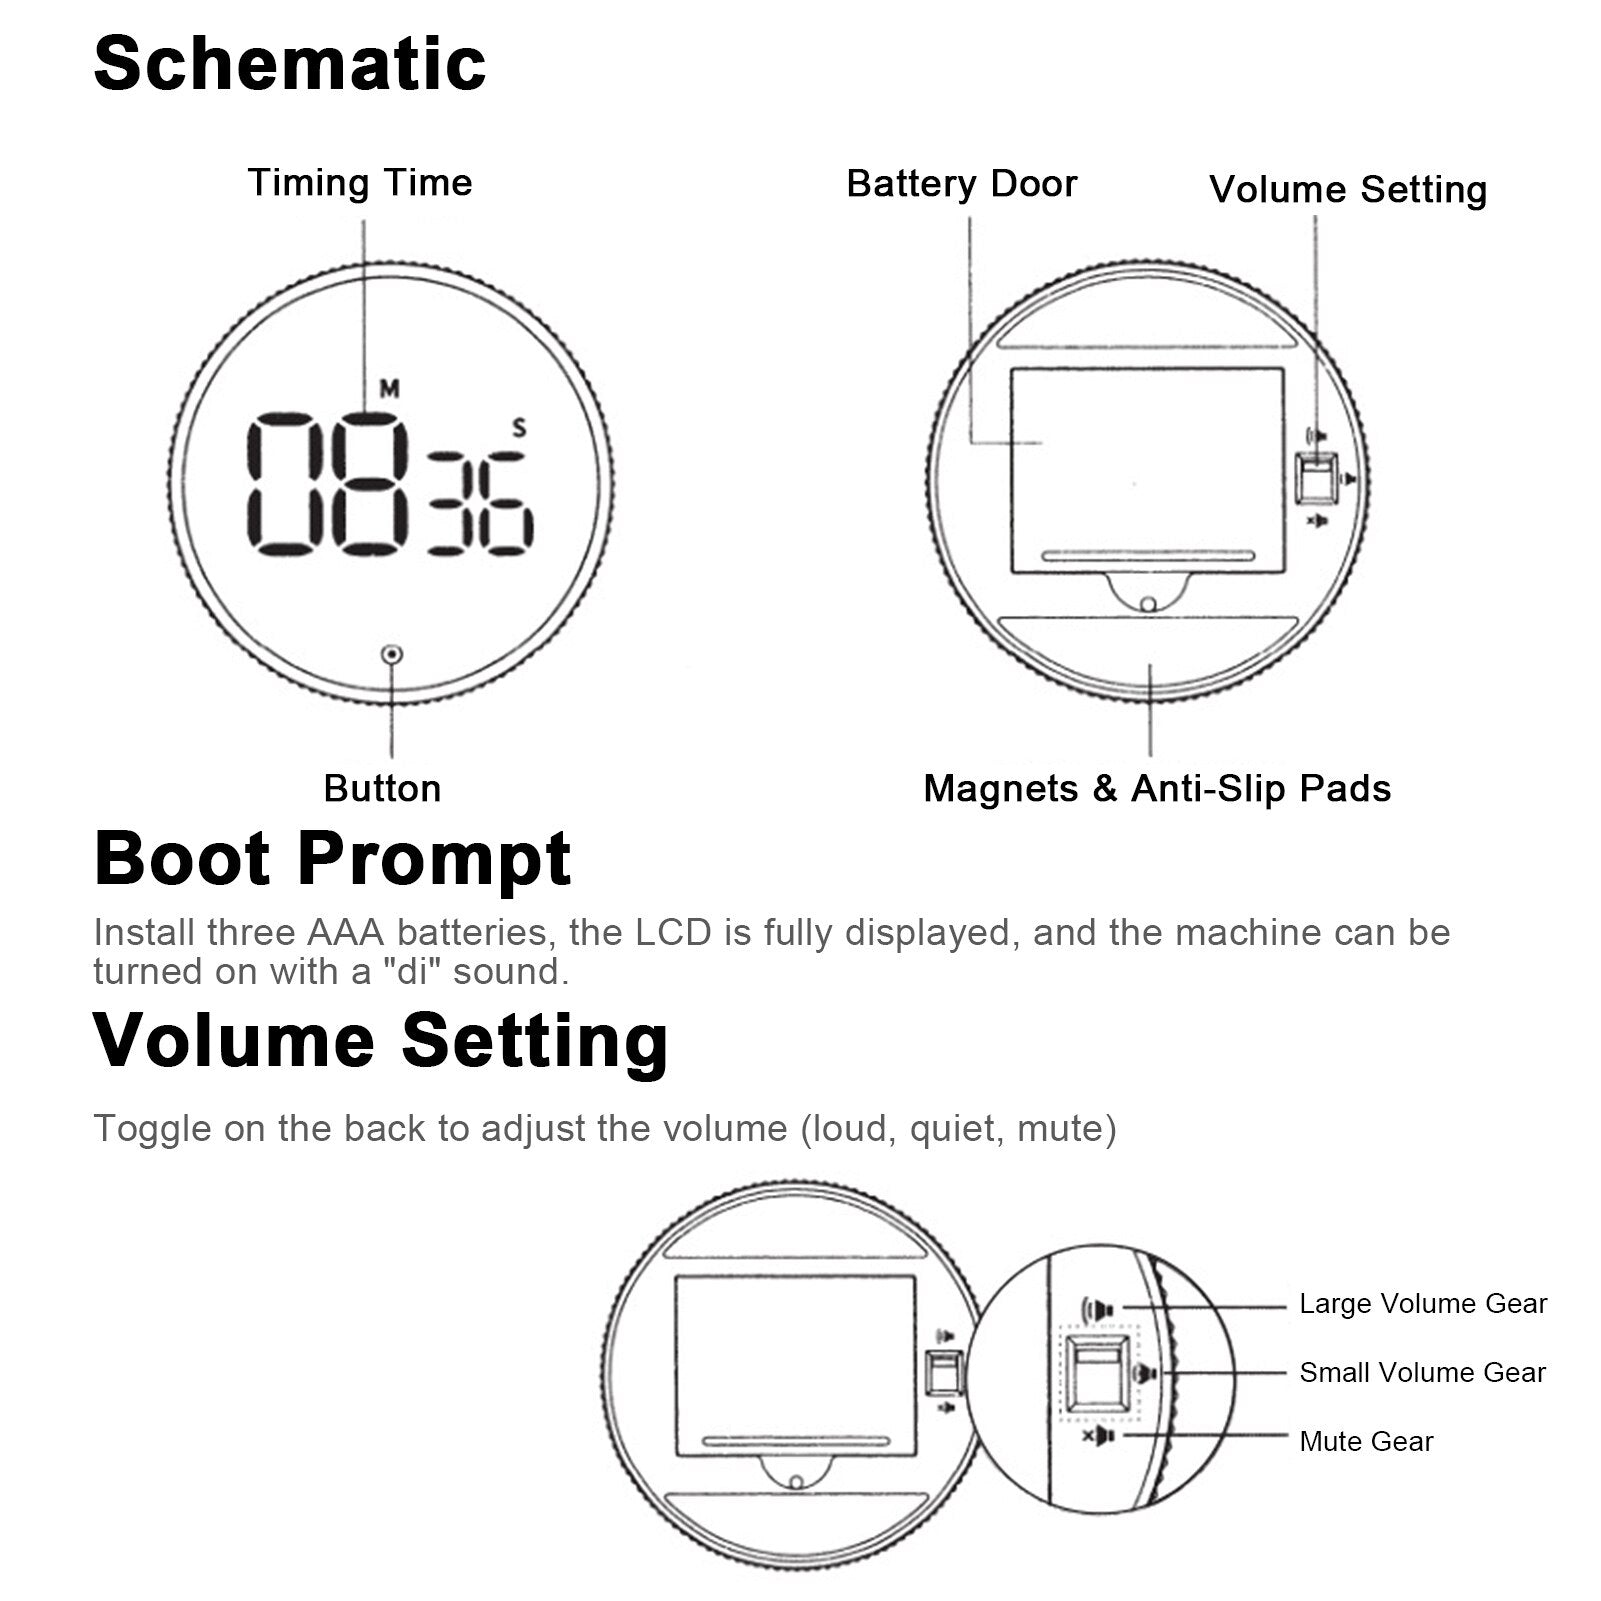 Baseus Magnetic Digital Timer Schematic outlining the boot prompt and volume setting